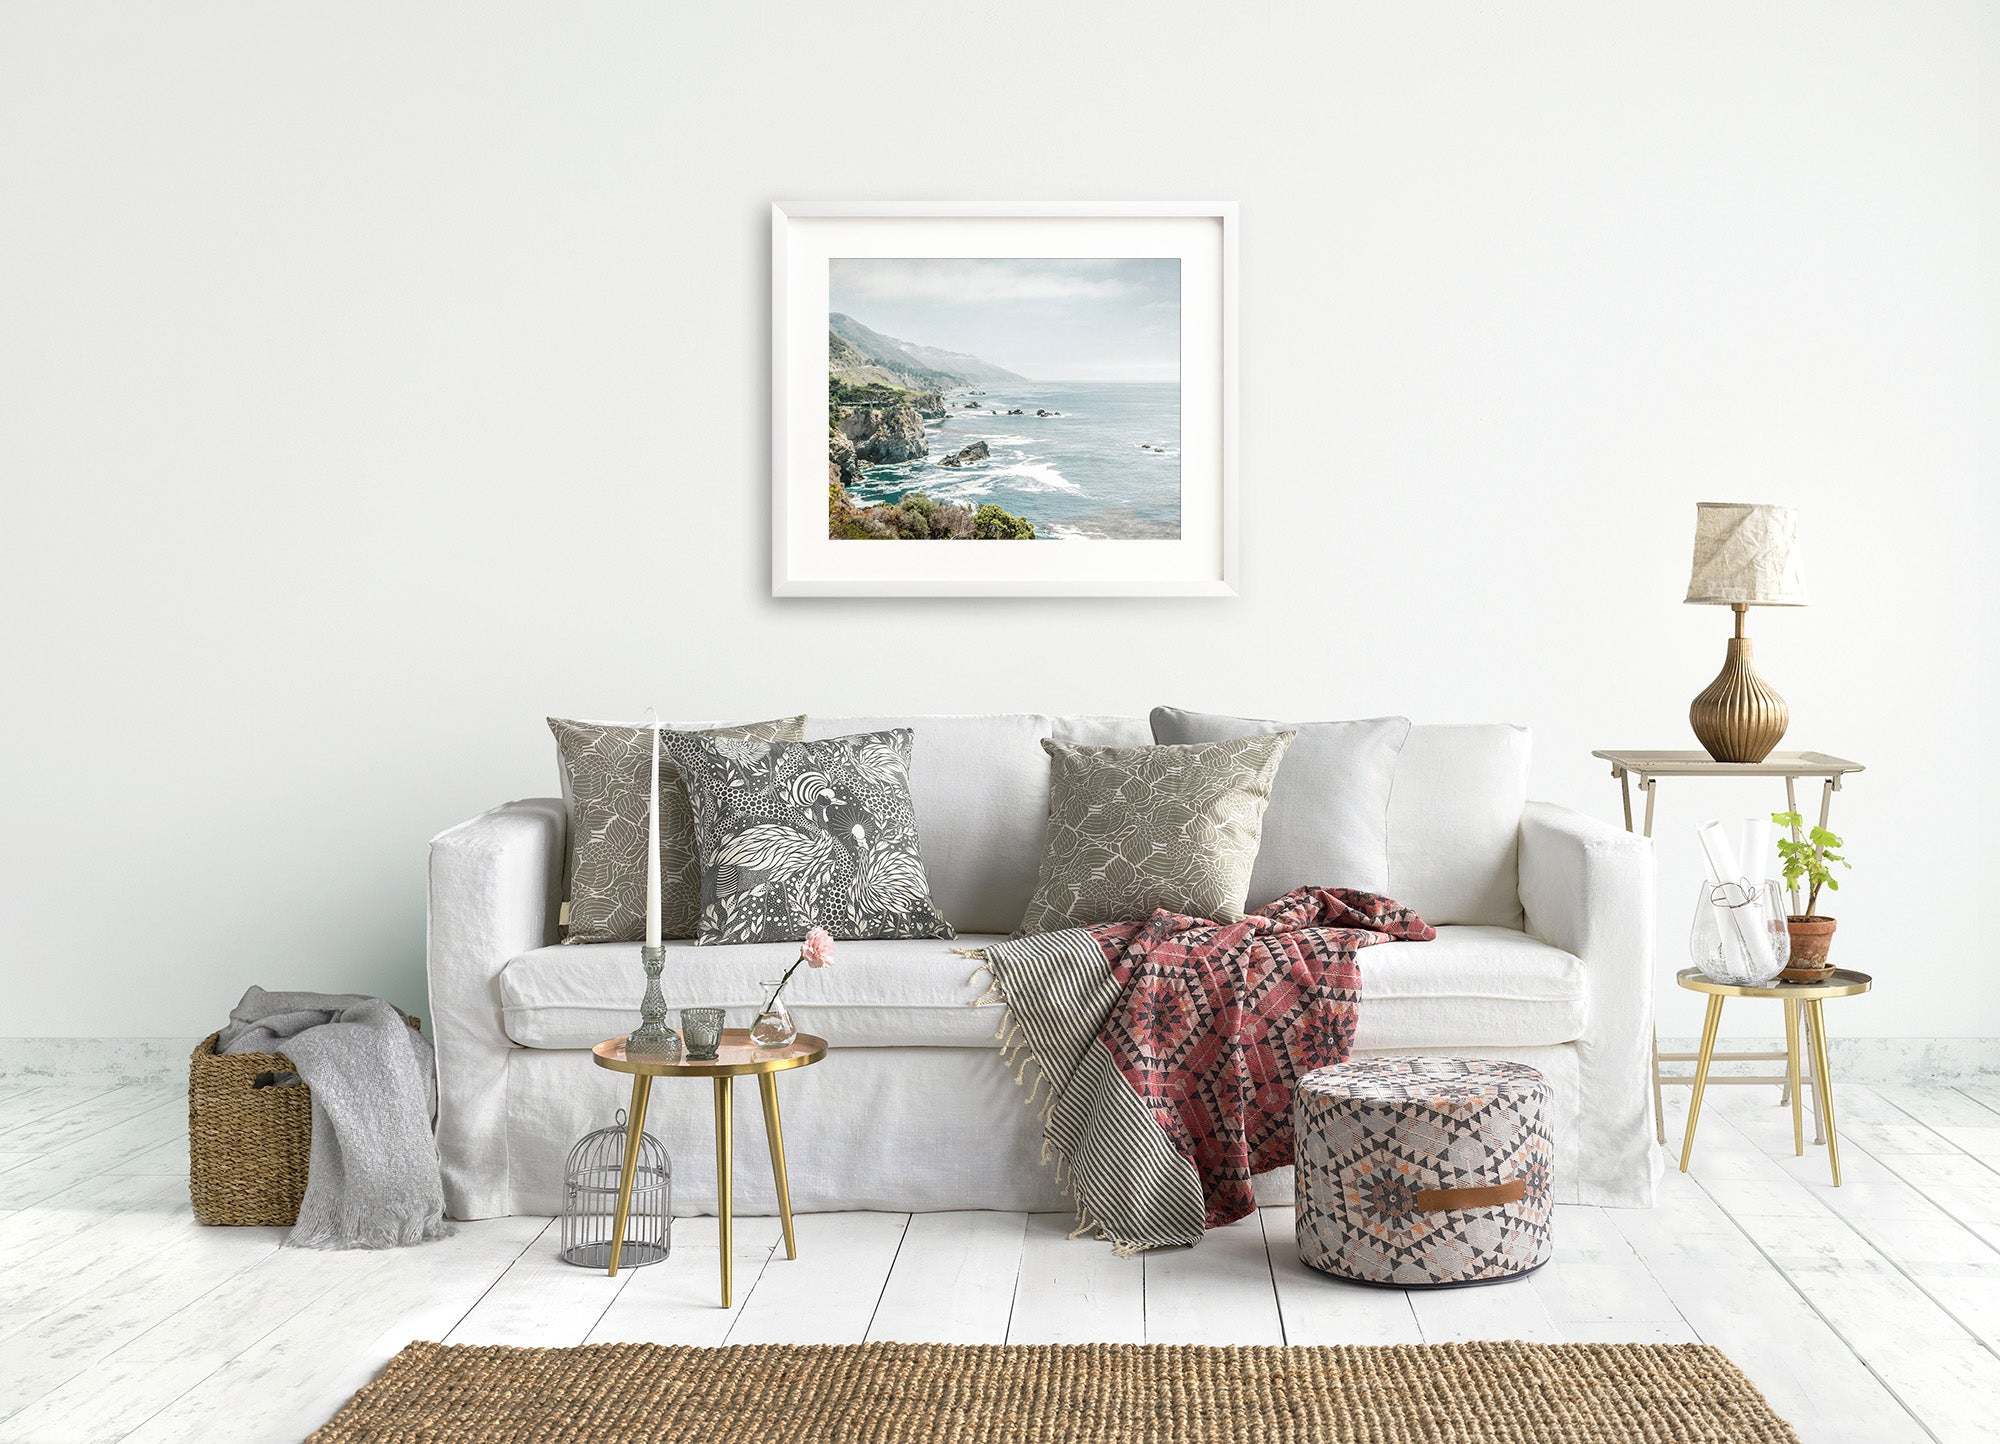 A cozy living room with a white sofa decorated with patterned cushions, a side table with a lamp, a basket, and an Offley Green Big Sur Landscape Print of 'Rocky Rocks' on the wall.